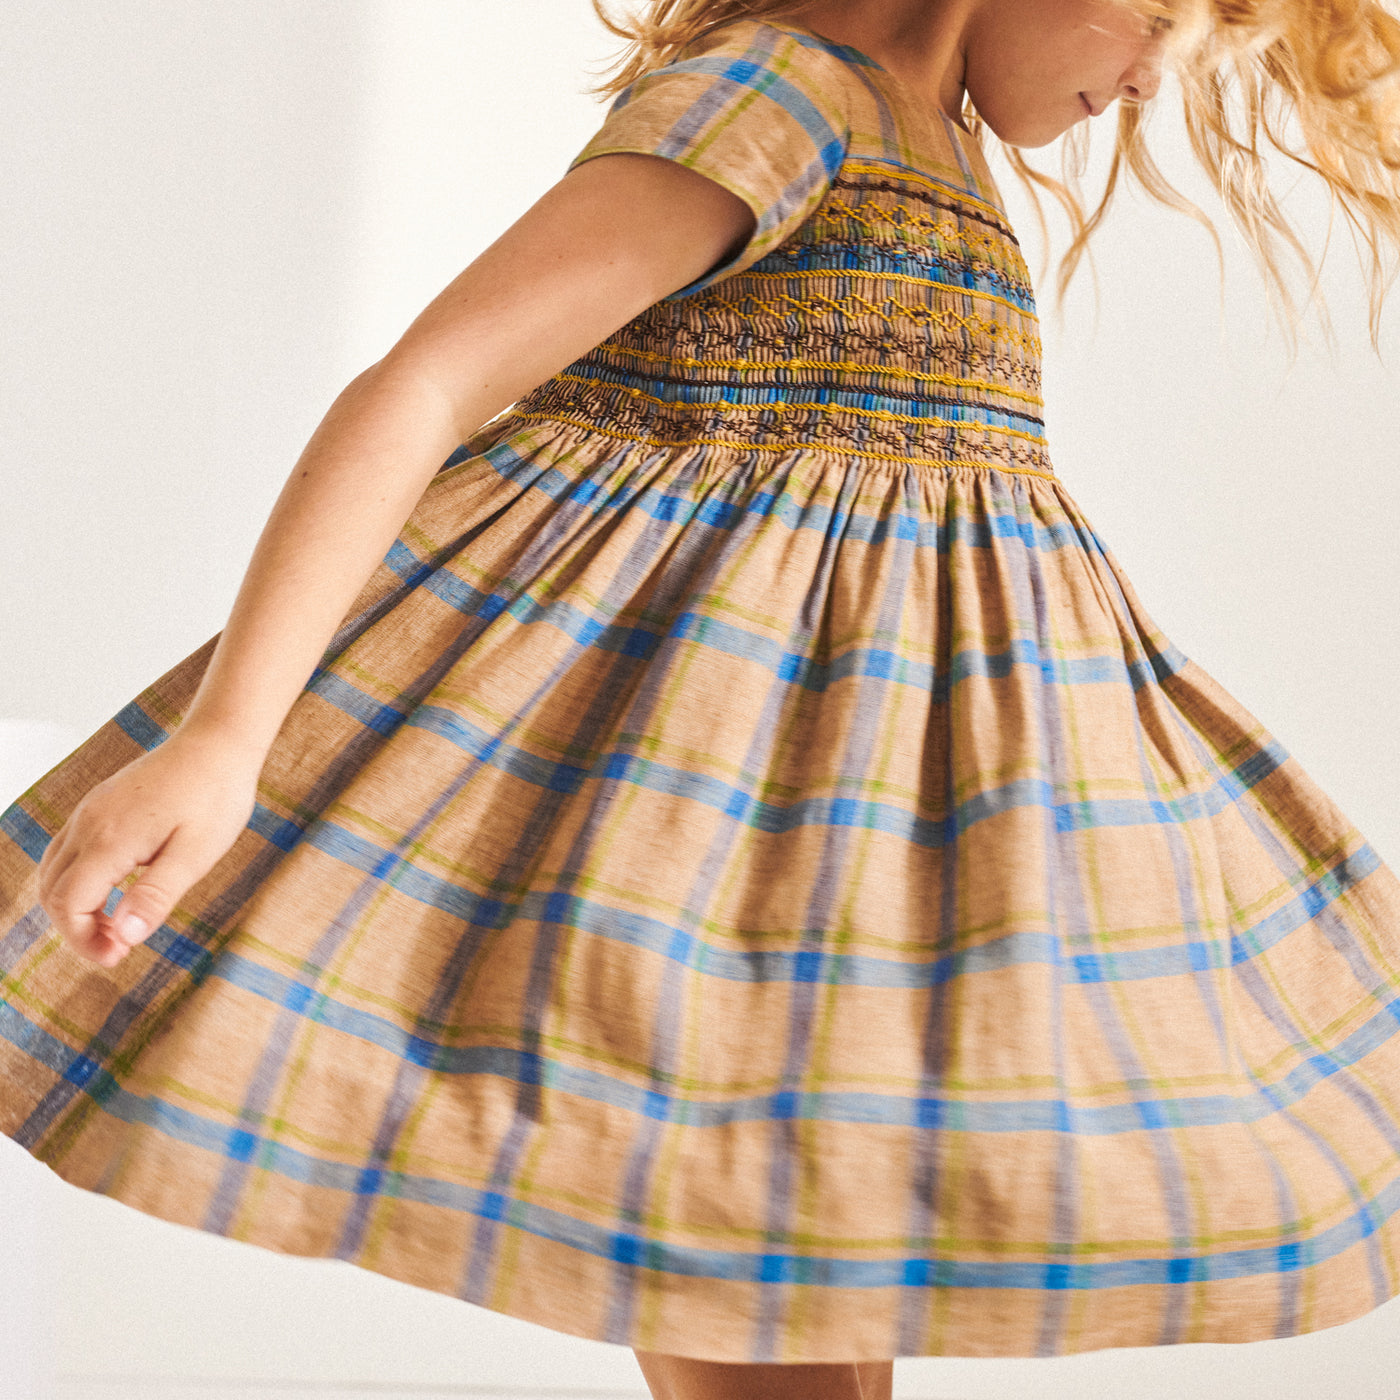 Girl twirling in orange and blue plaid dress from Bonpoint Spring Summer 2022 Collection